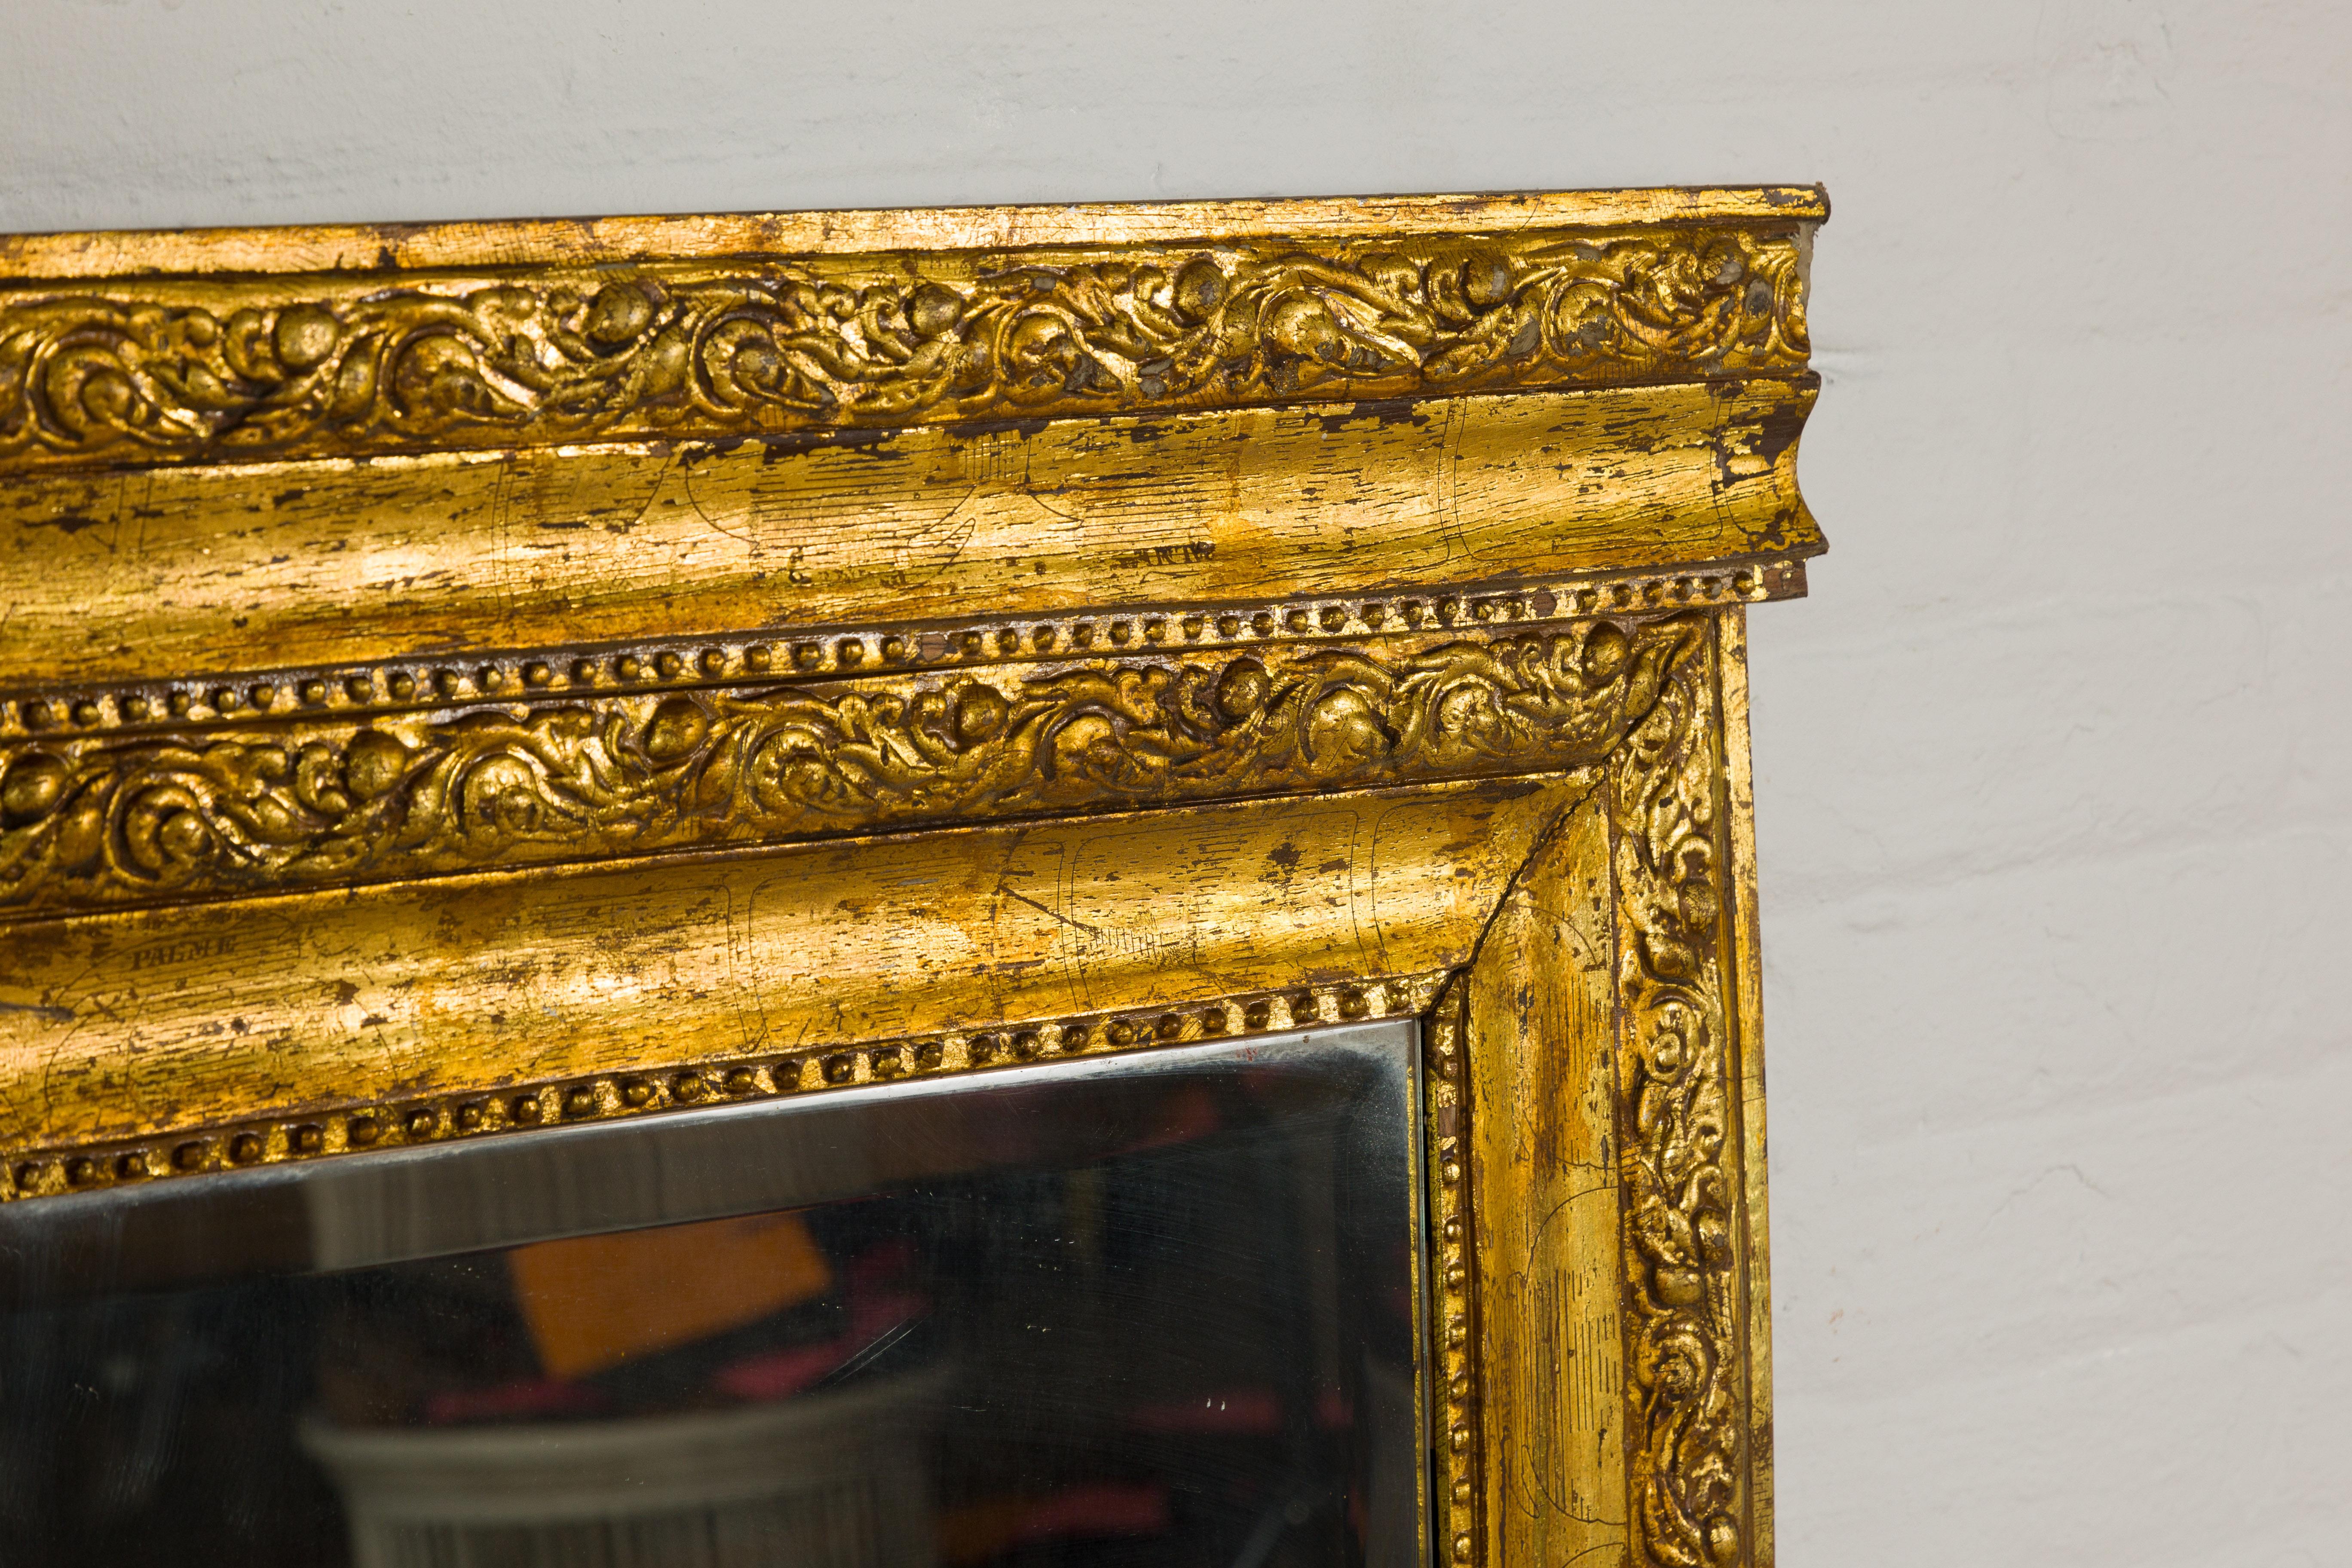 Dutch Colonial Vintage Giltwood Trumeau Mirror with Carved Scrollwork Motifs For Sale 5